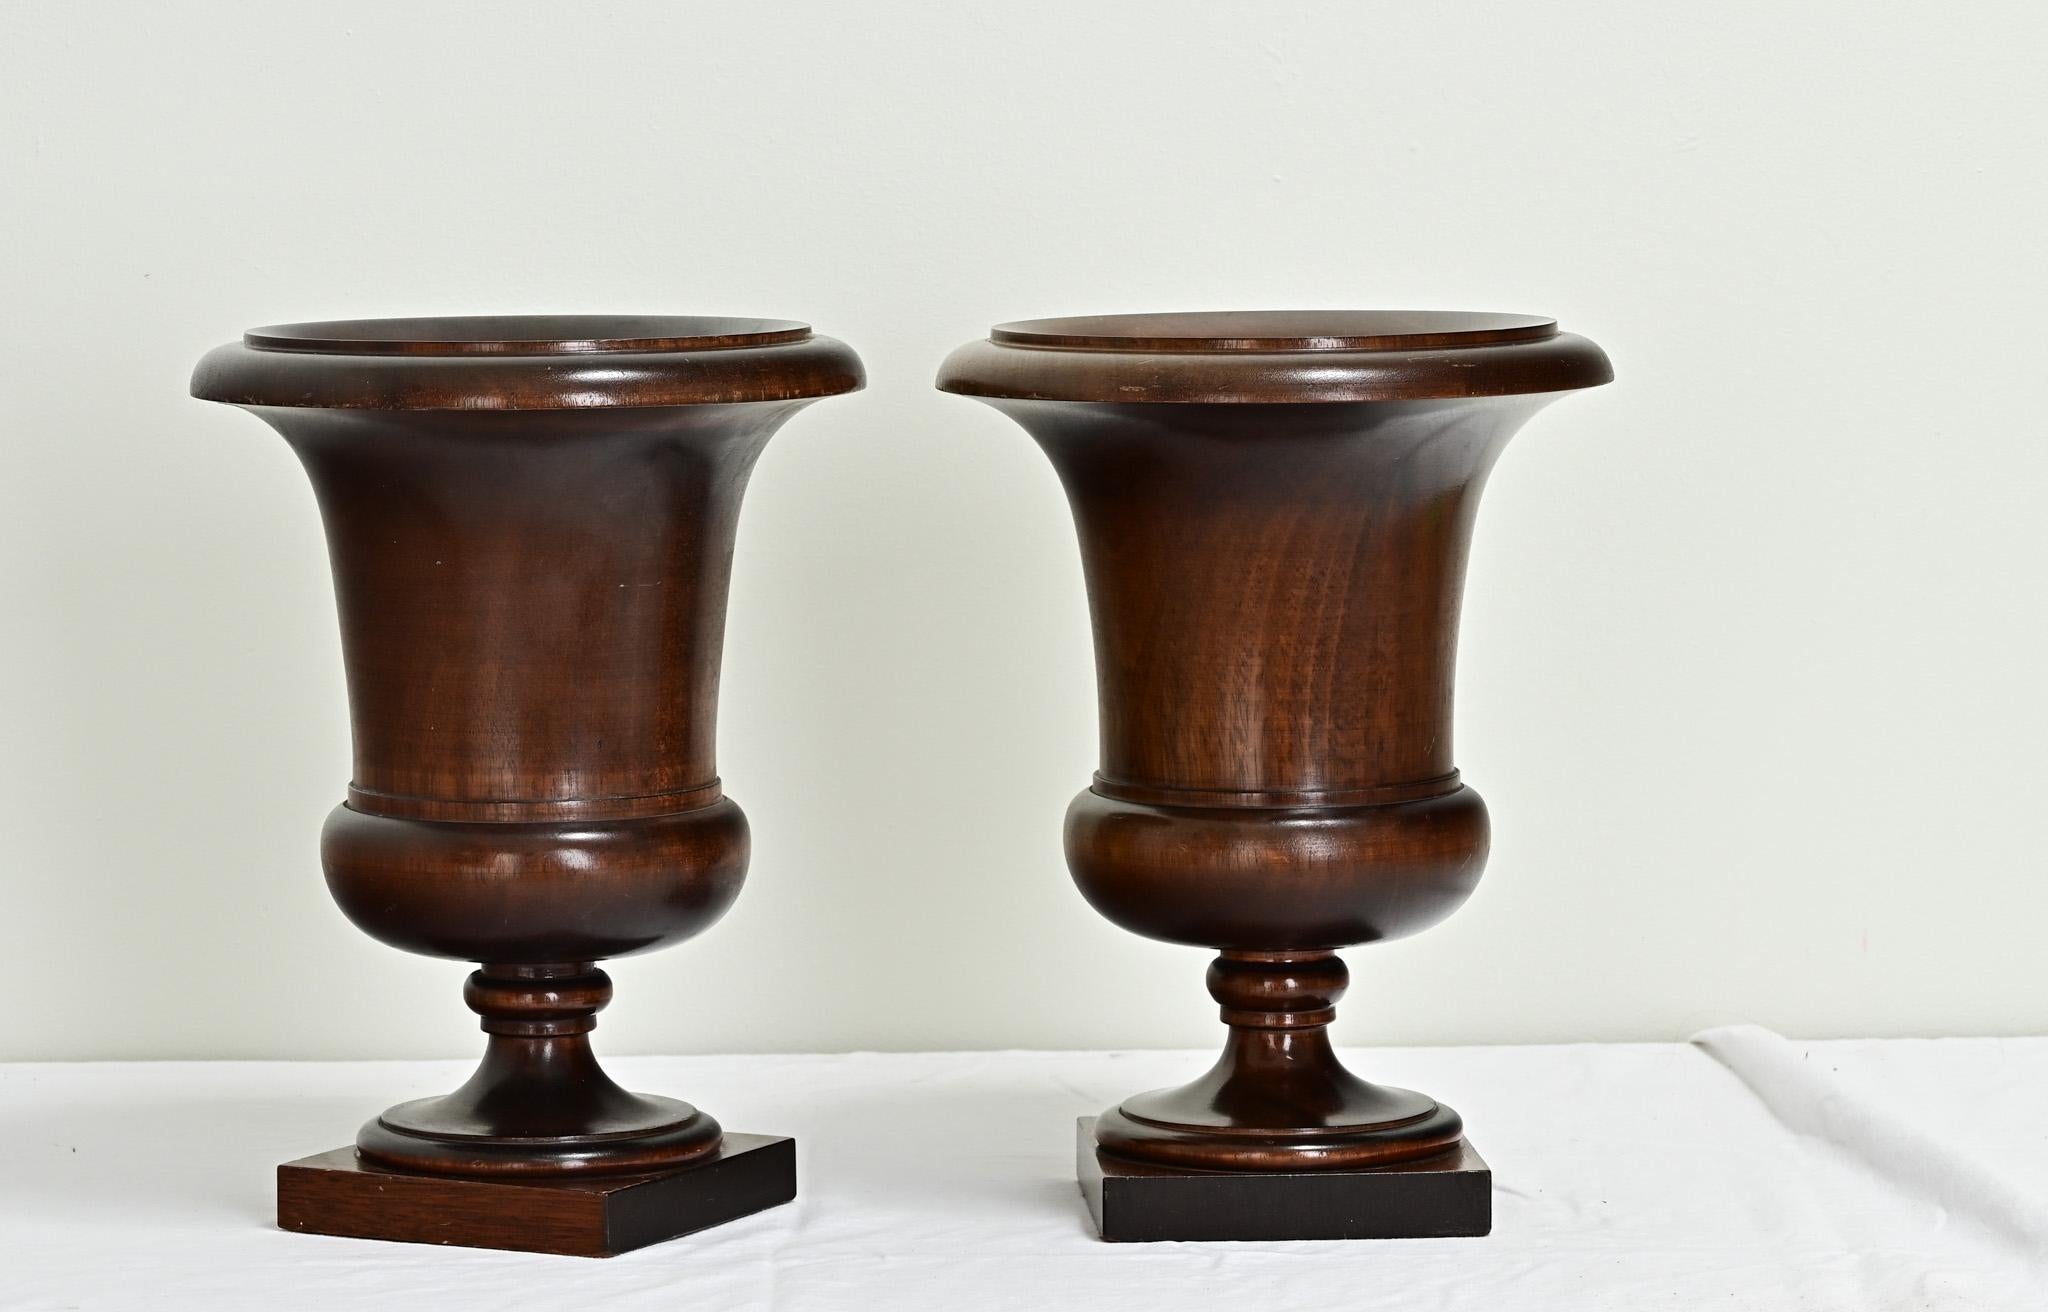 Other English Pair of 19th Century Walnut Urns For Sale